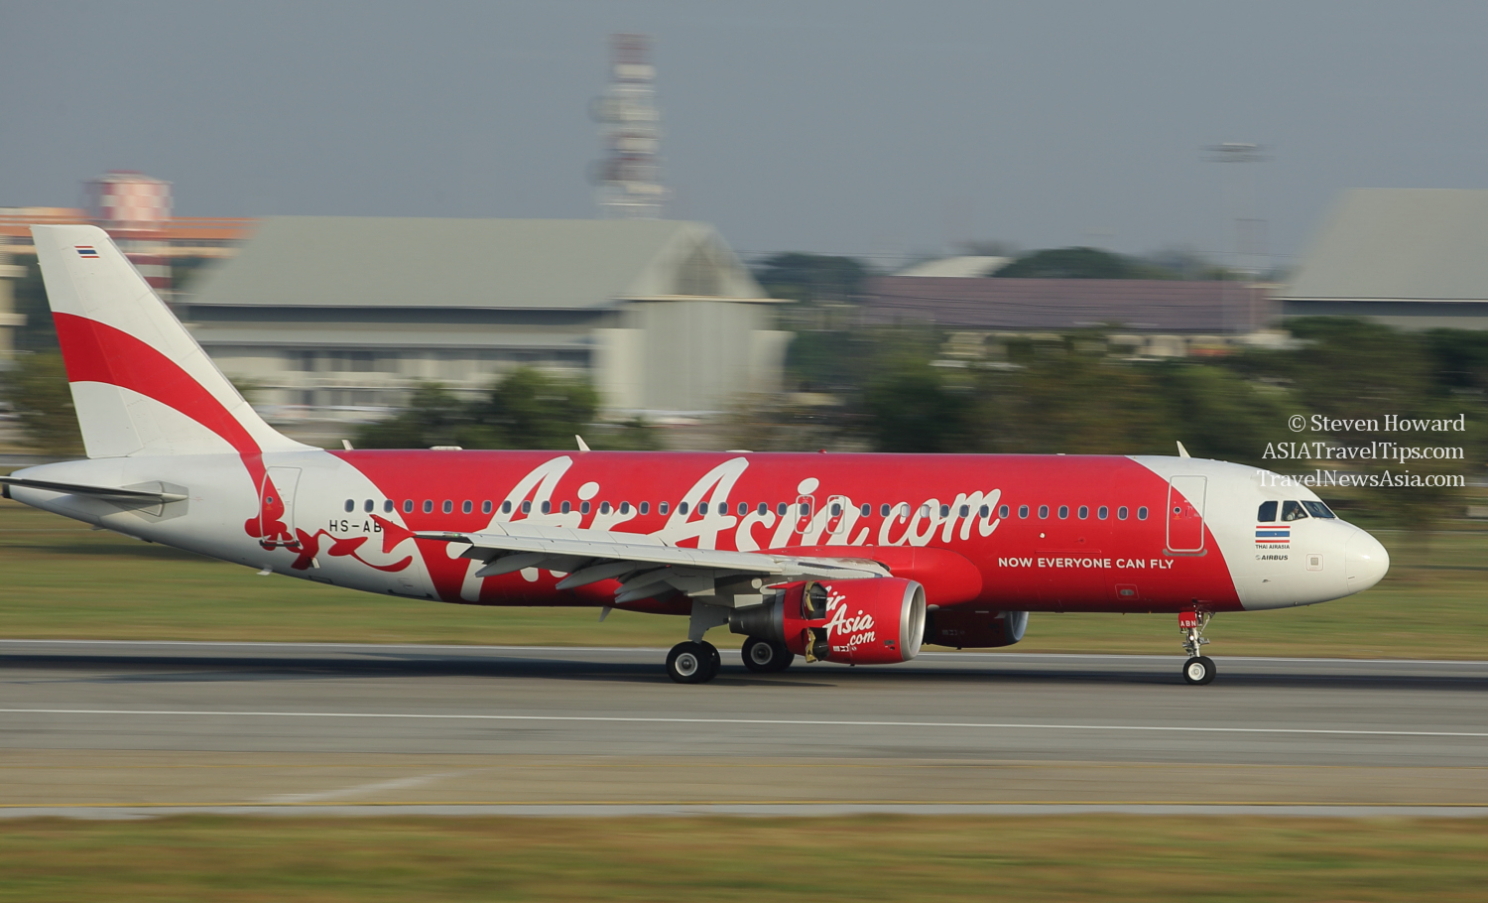 Thai AirAsia A320 reg: HS-ABN. Picture by Steven Howard of TravelNewsAsia.com Click to enlarge.